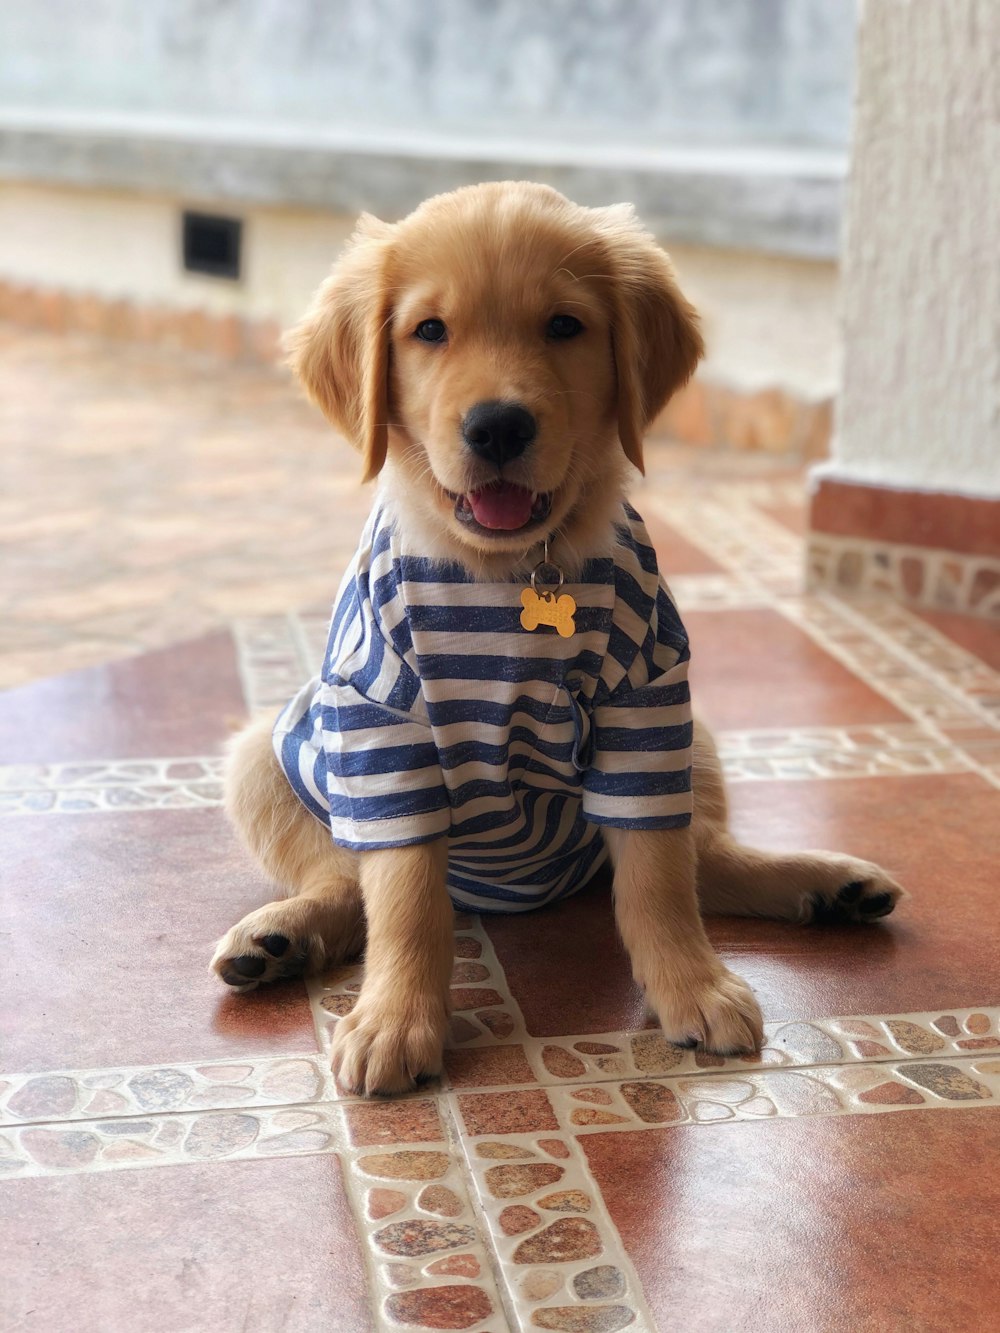 brown short coated dog wearing blue and white striped shirt